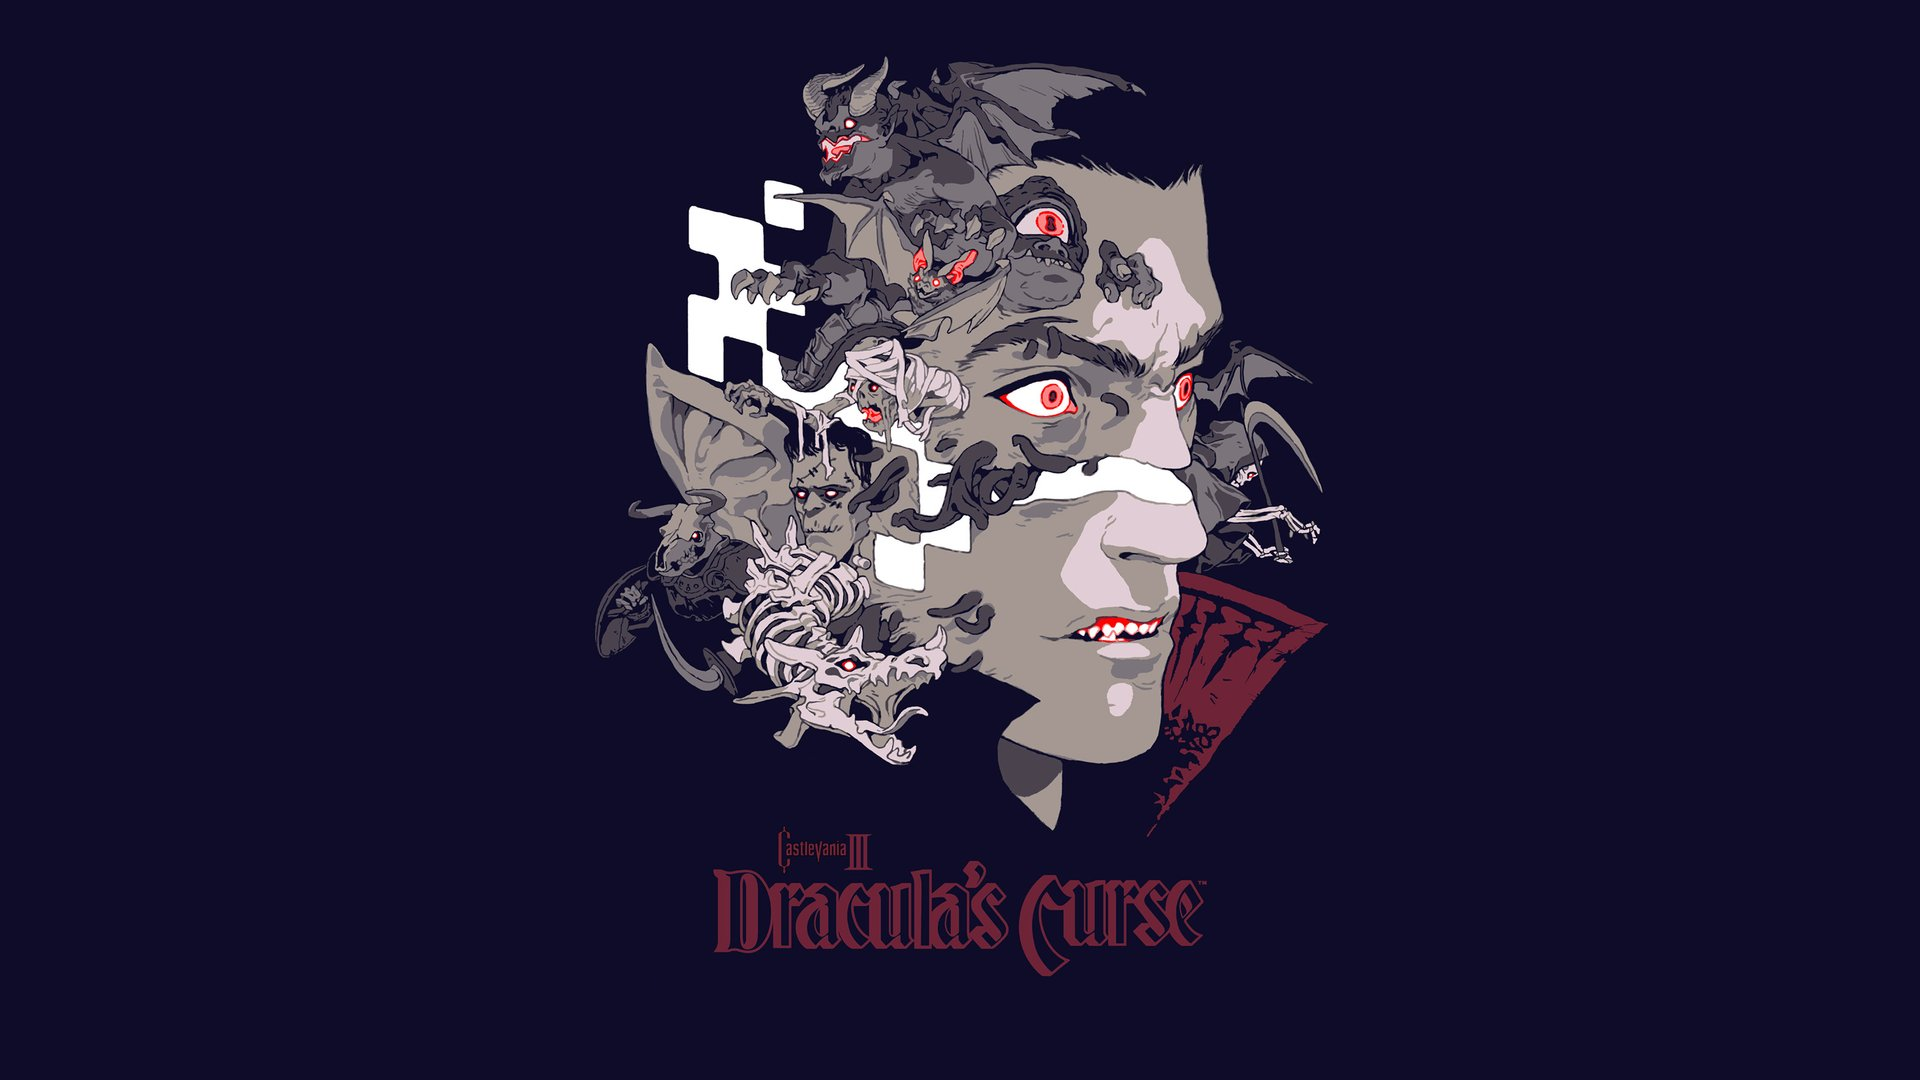 Video Game Castlevania III: Dracula's Curse HD Wallpaper | Background Image